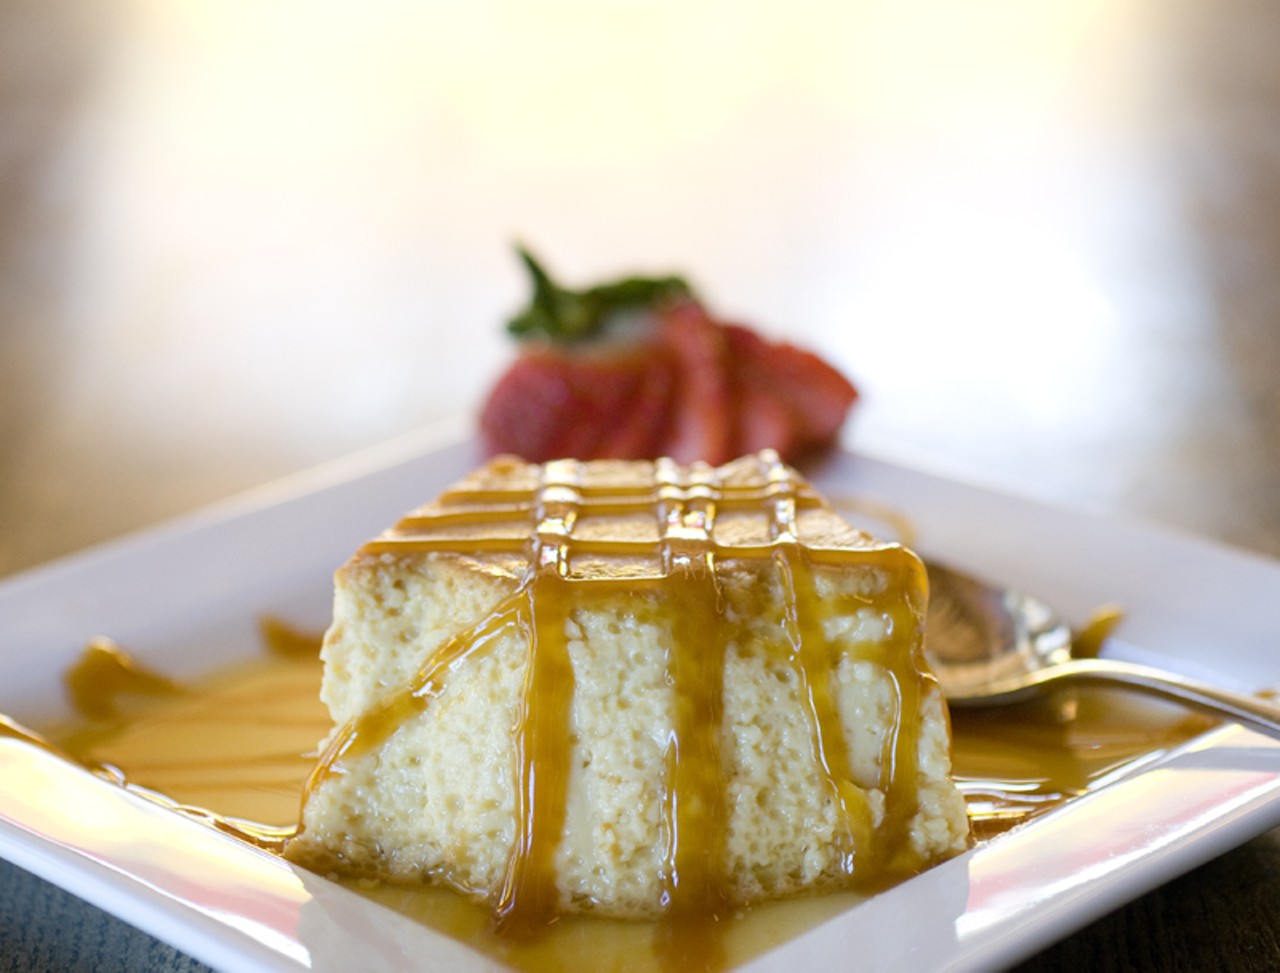 Flan: Vanilla custard made with eggs and liquor, drizzled with caramelized topping.